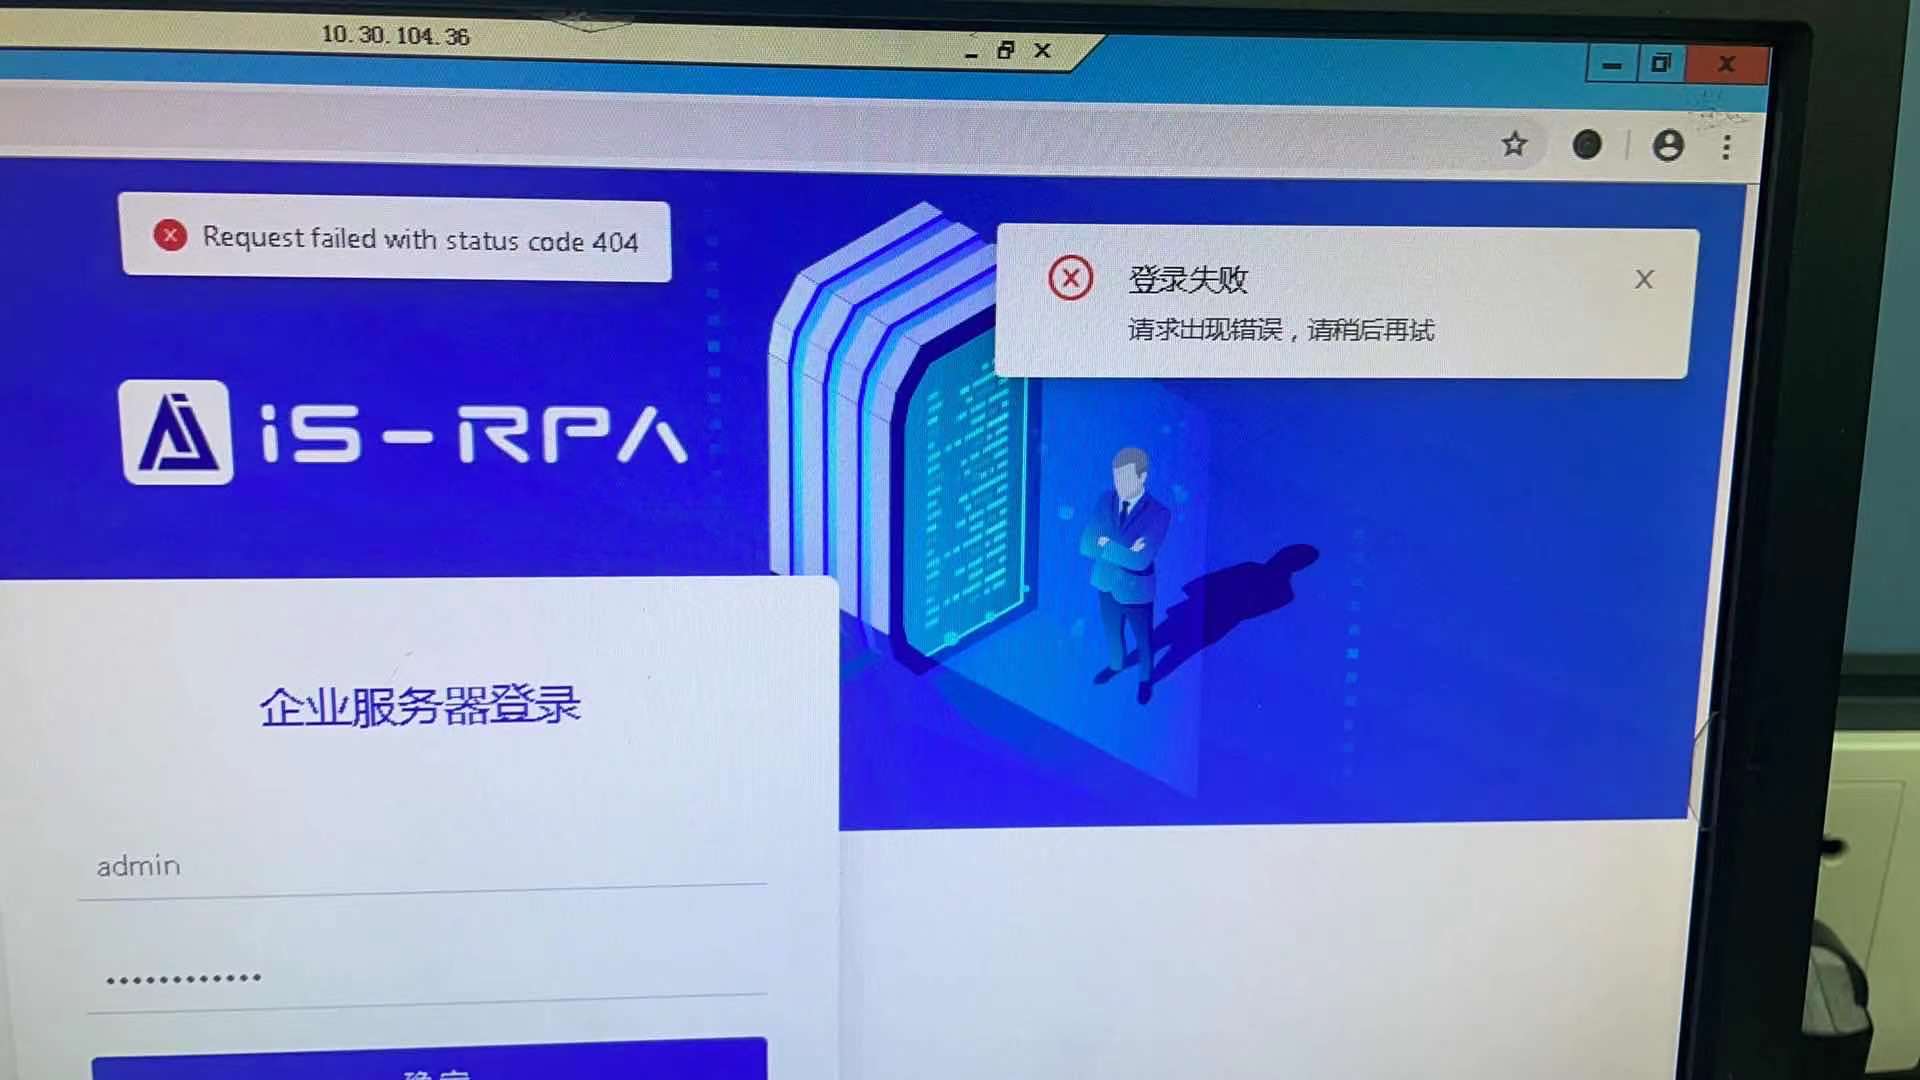 rpa 服务端无法登陆 #Request failed with status code 404